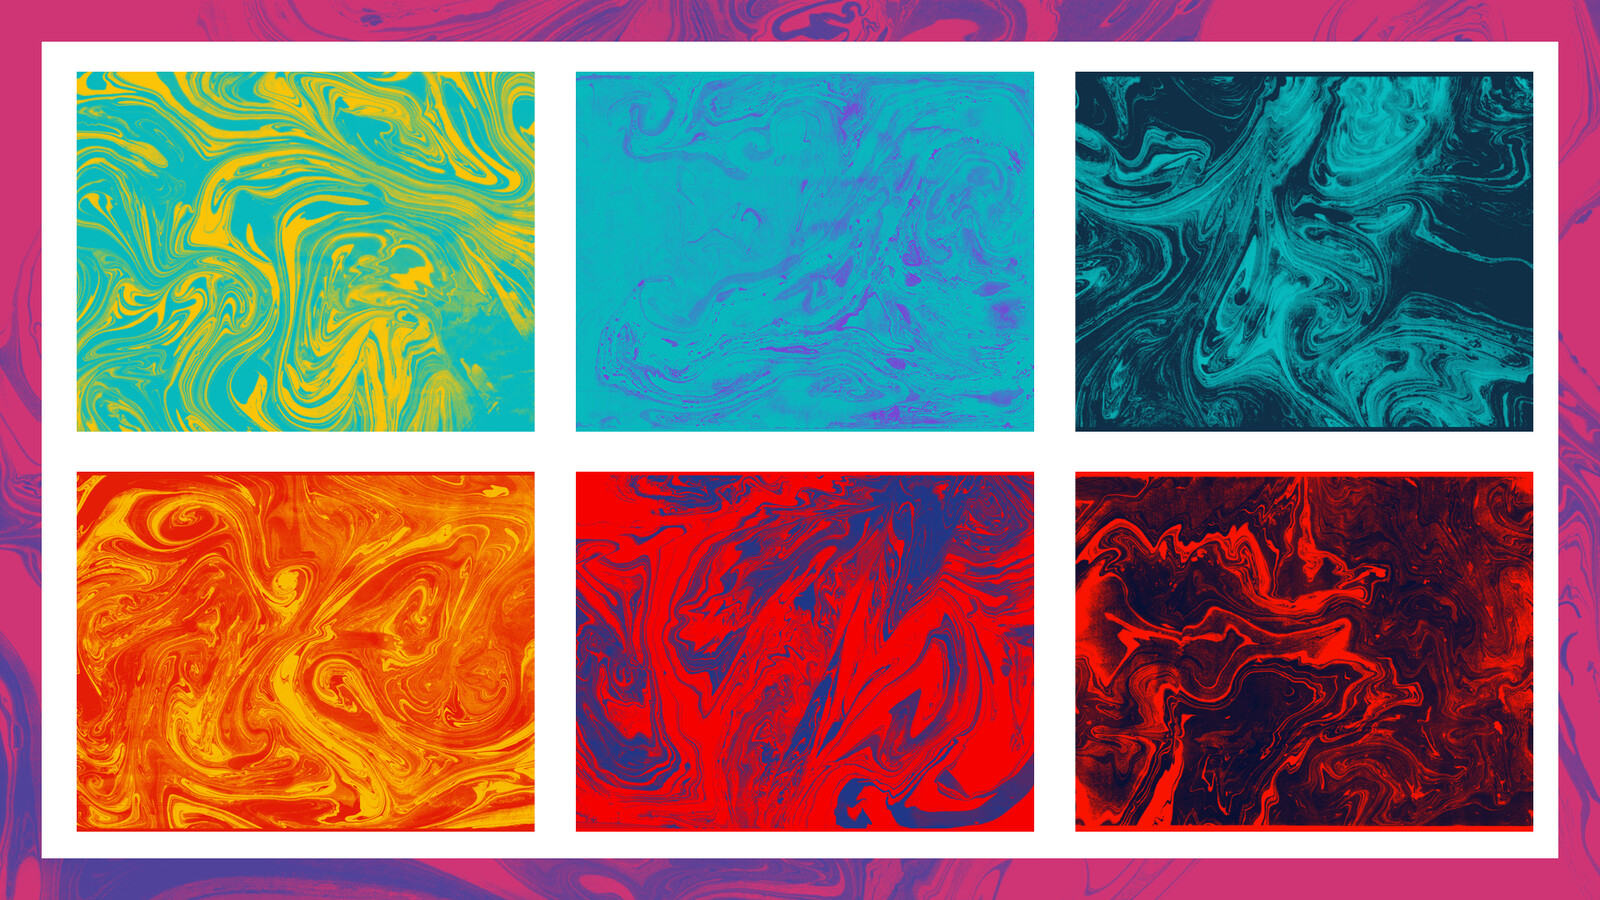 The use of paper marbling represents the texture and movement of lava.